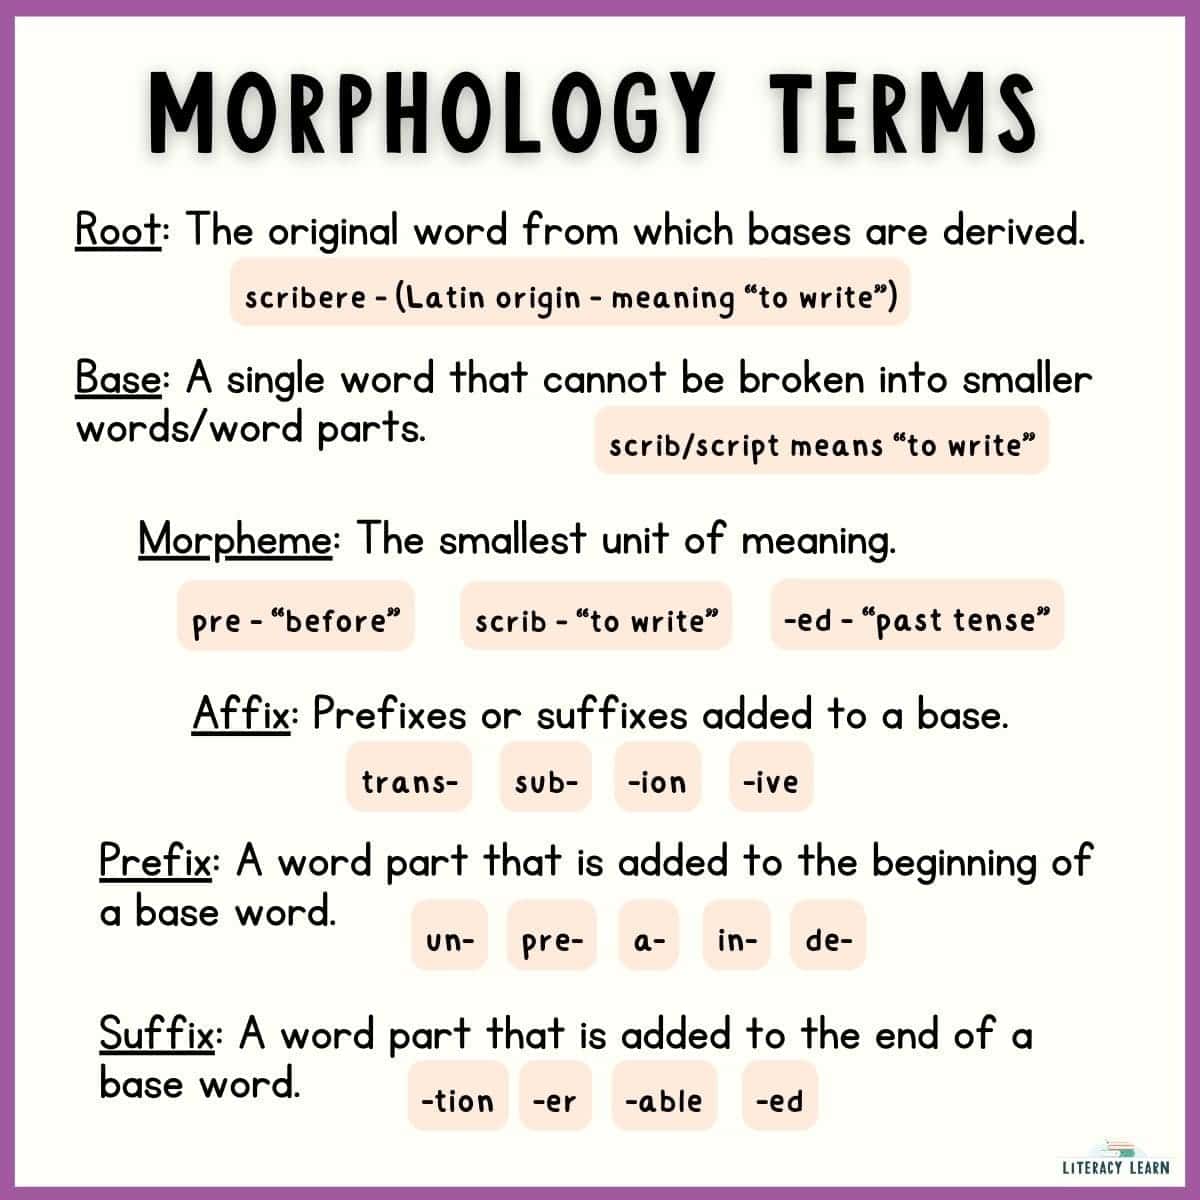 Graphic explaining definitions of important morphology terms.